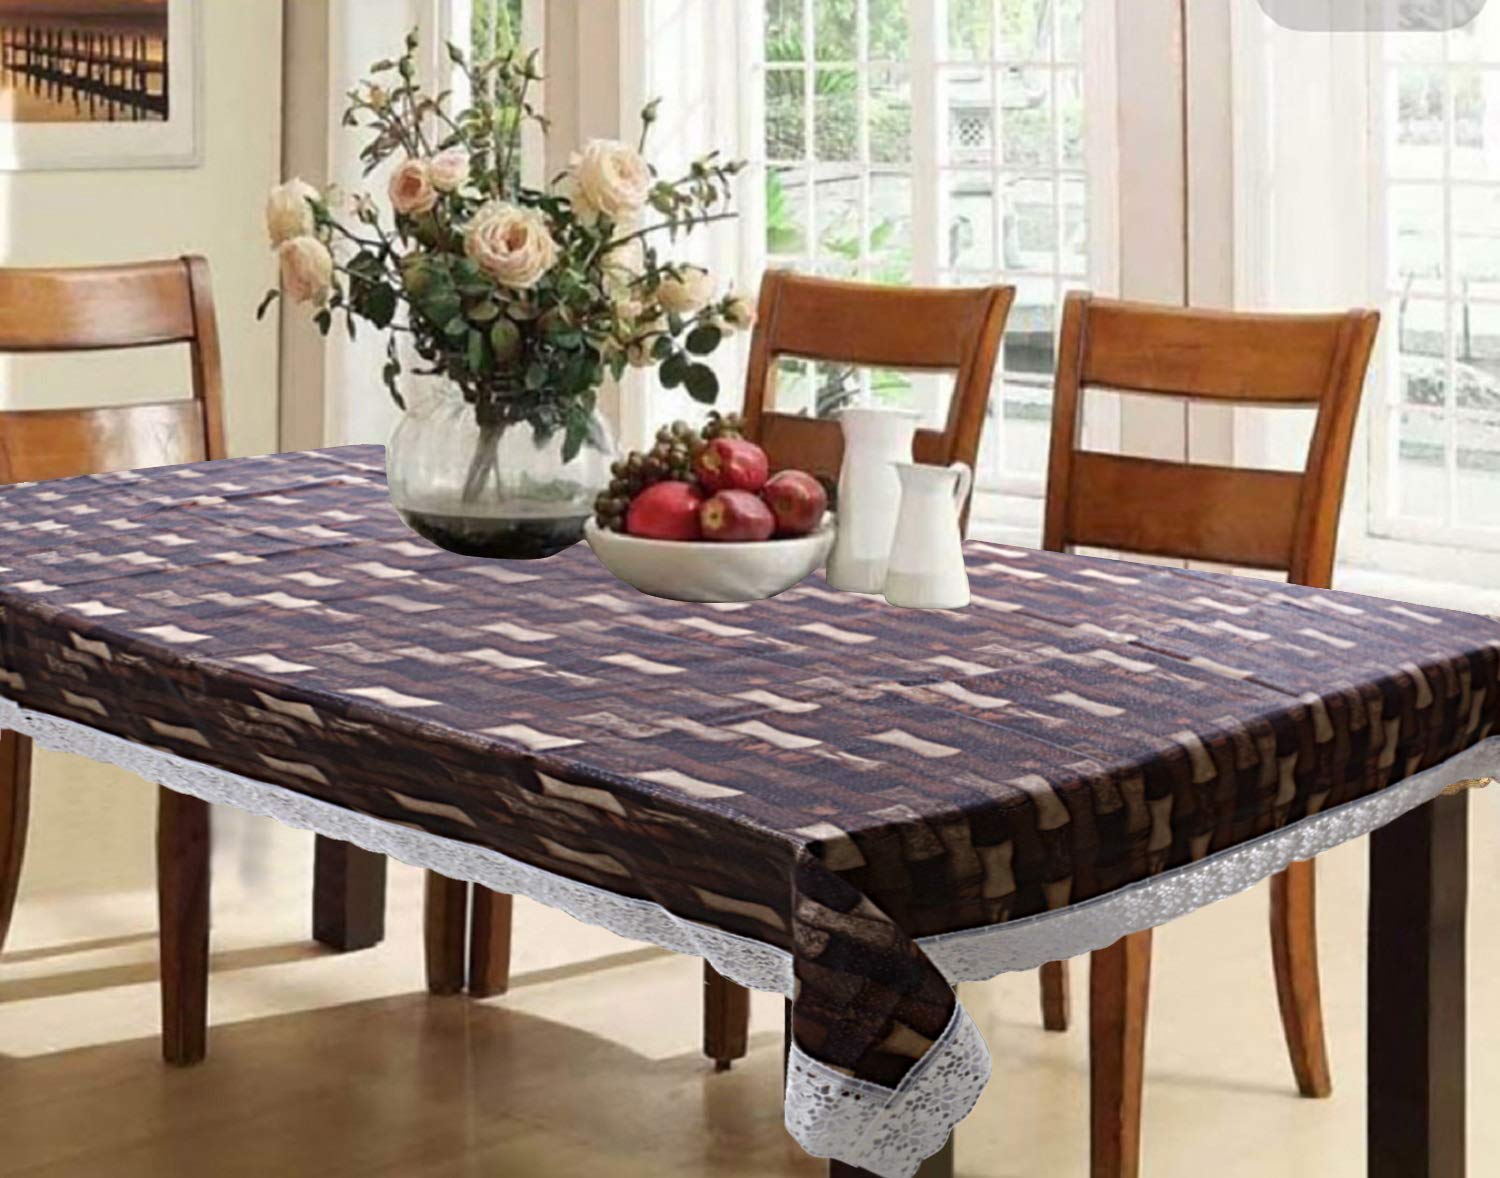 Heart Home Bamboo Design PVC 6 Seater Dining Table Cover 60"X90" (Brown) - Cthh6987-1 Unit